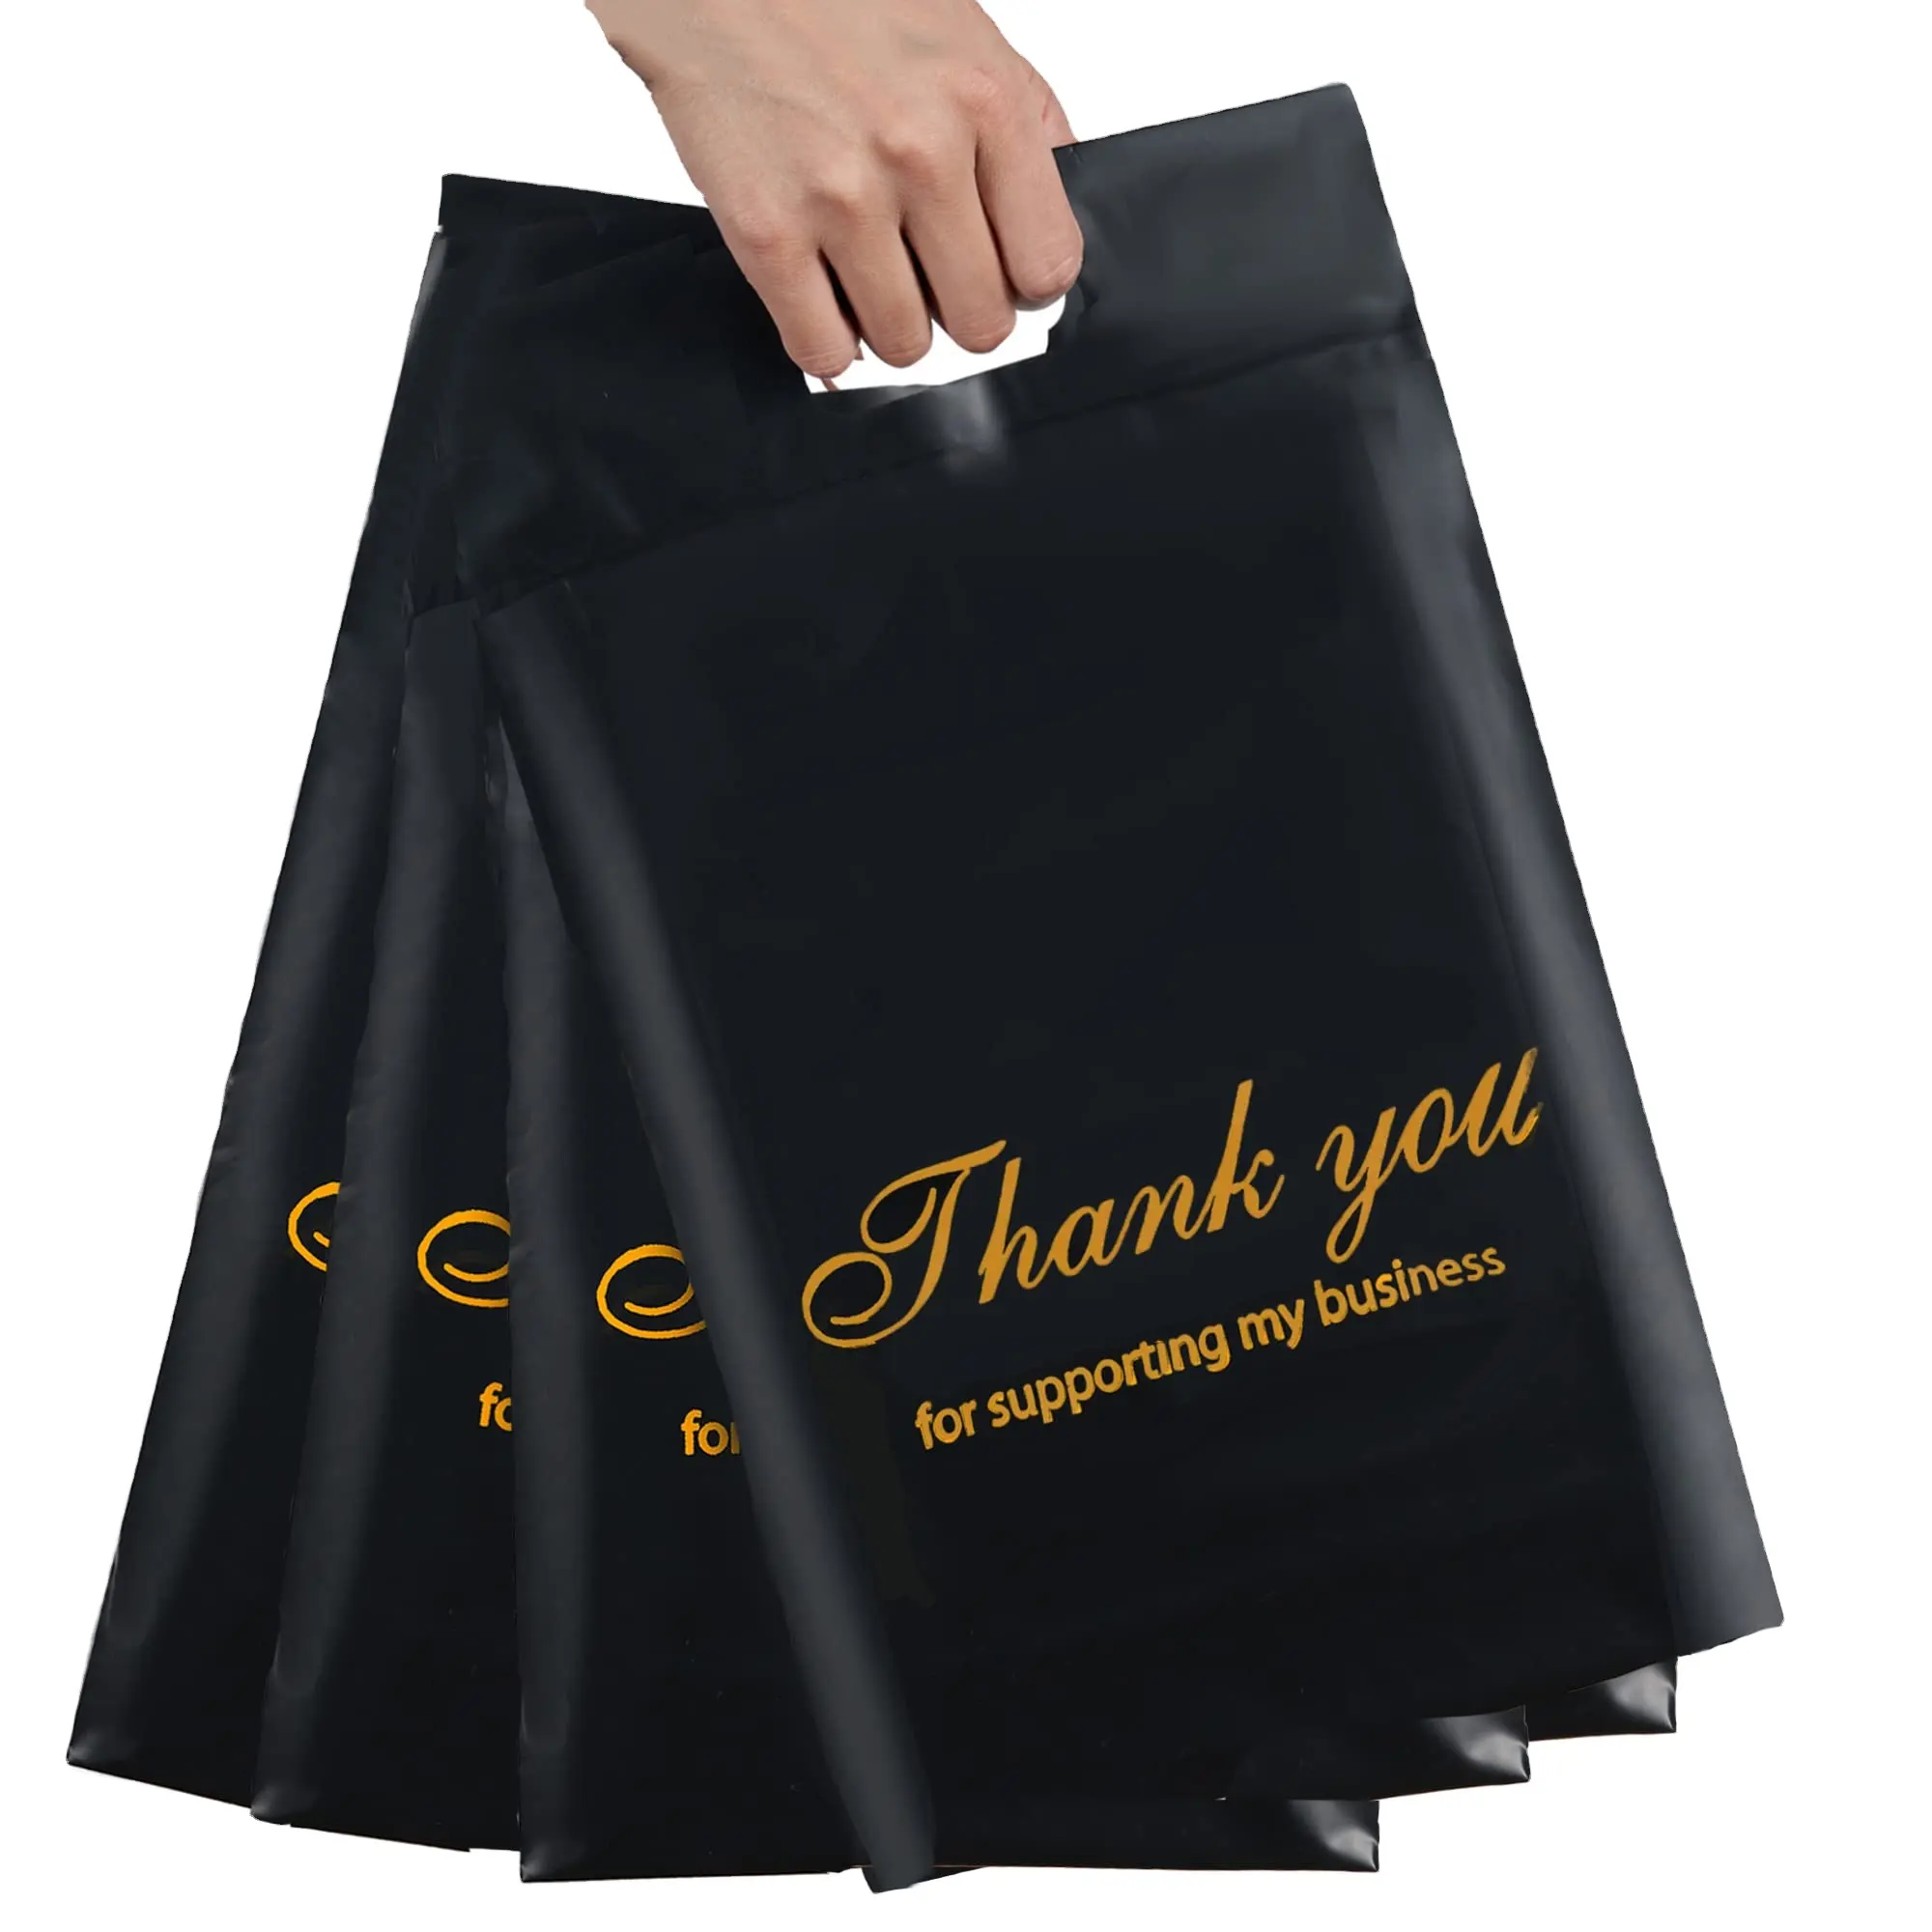 Ladies Mail Fancy Kids School Plastic Eco Friendly Hand Items Free Poly Shipping Bag For Clothing With Logos.